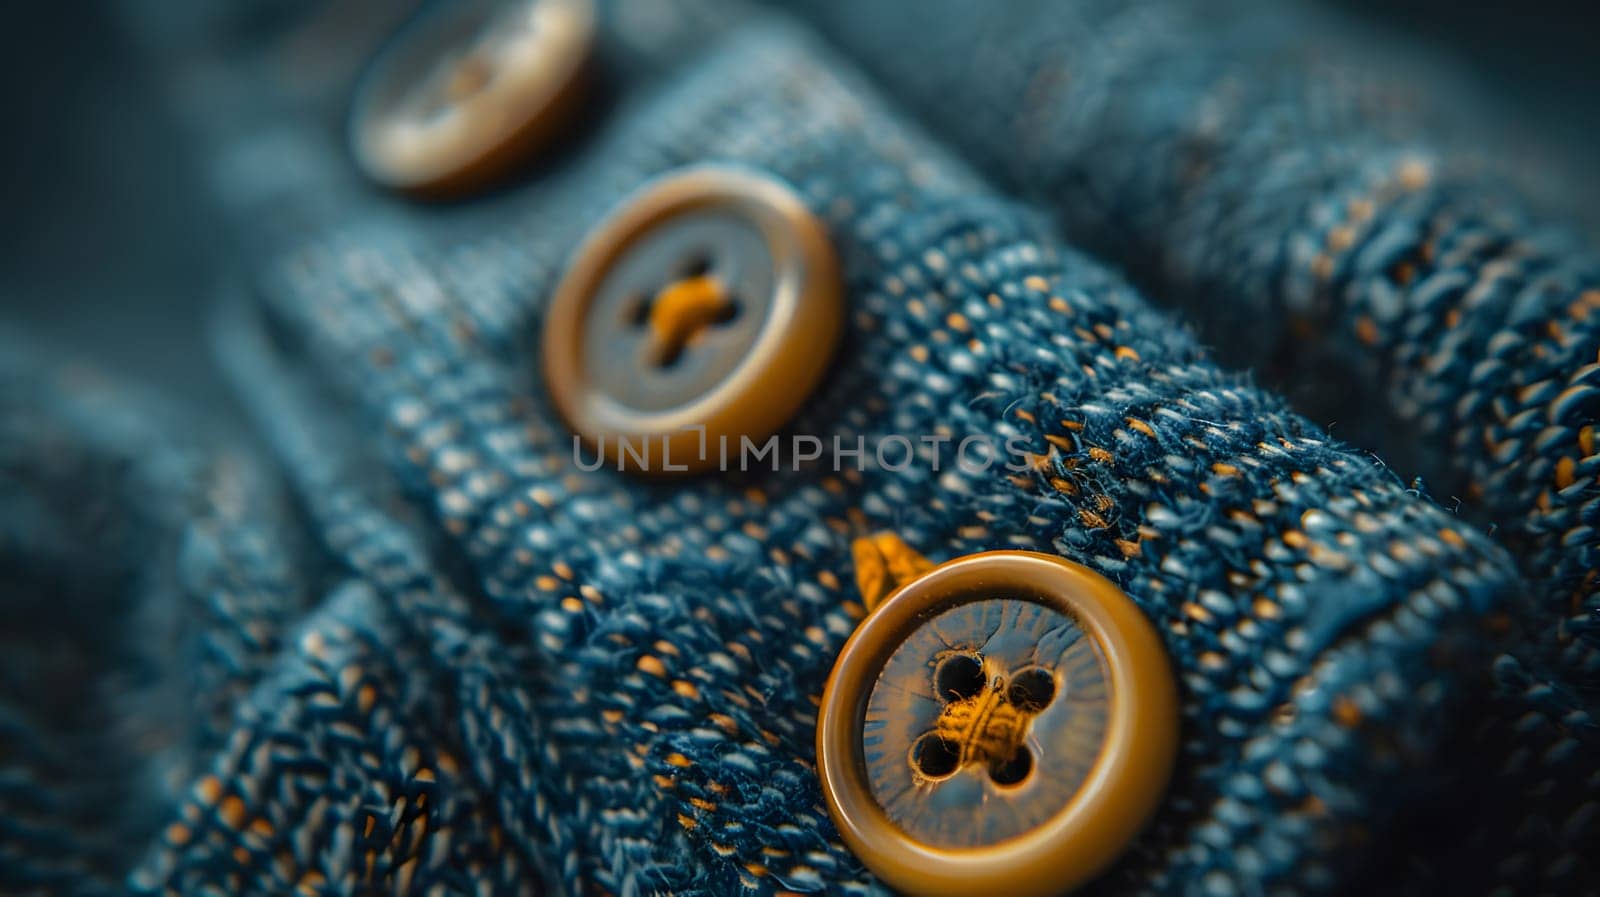 A detailed closeup shot of three electric blue buttons on a denim sweater, resembling insect snouts. The wool pattern creates an artistic terrestrial animal motif